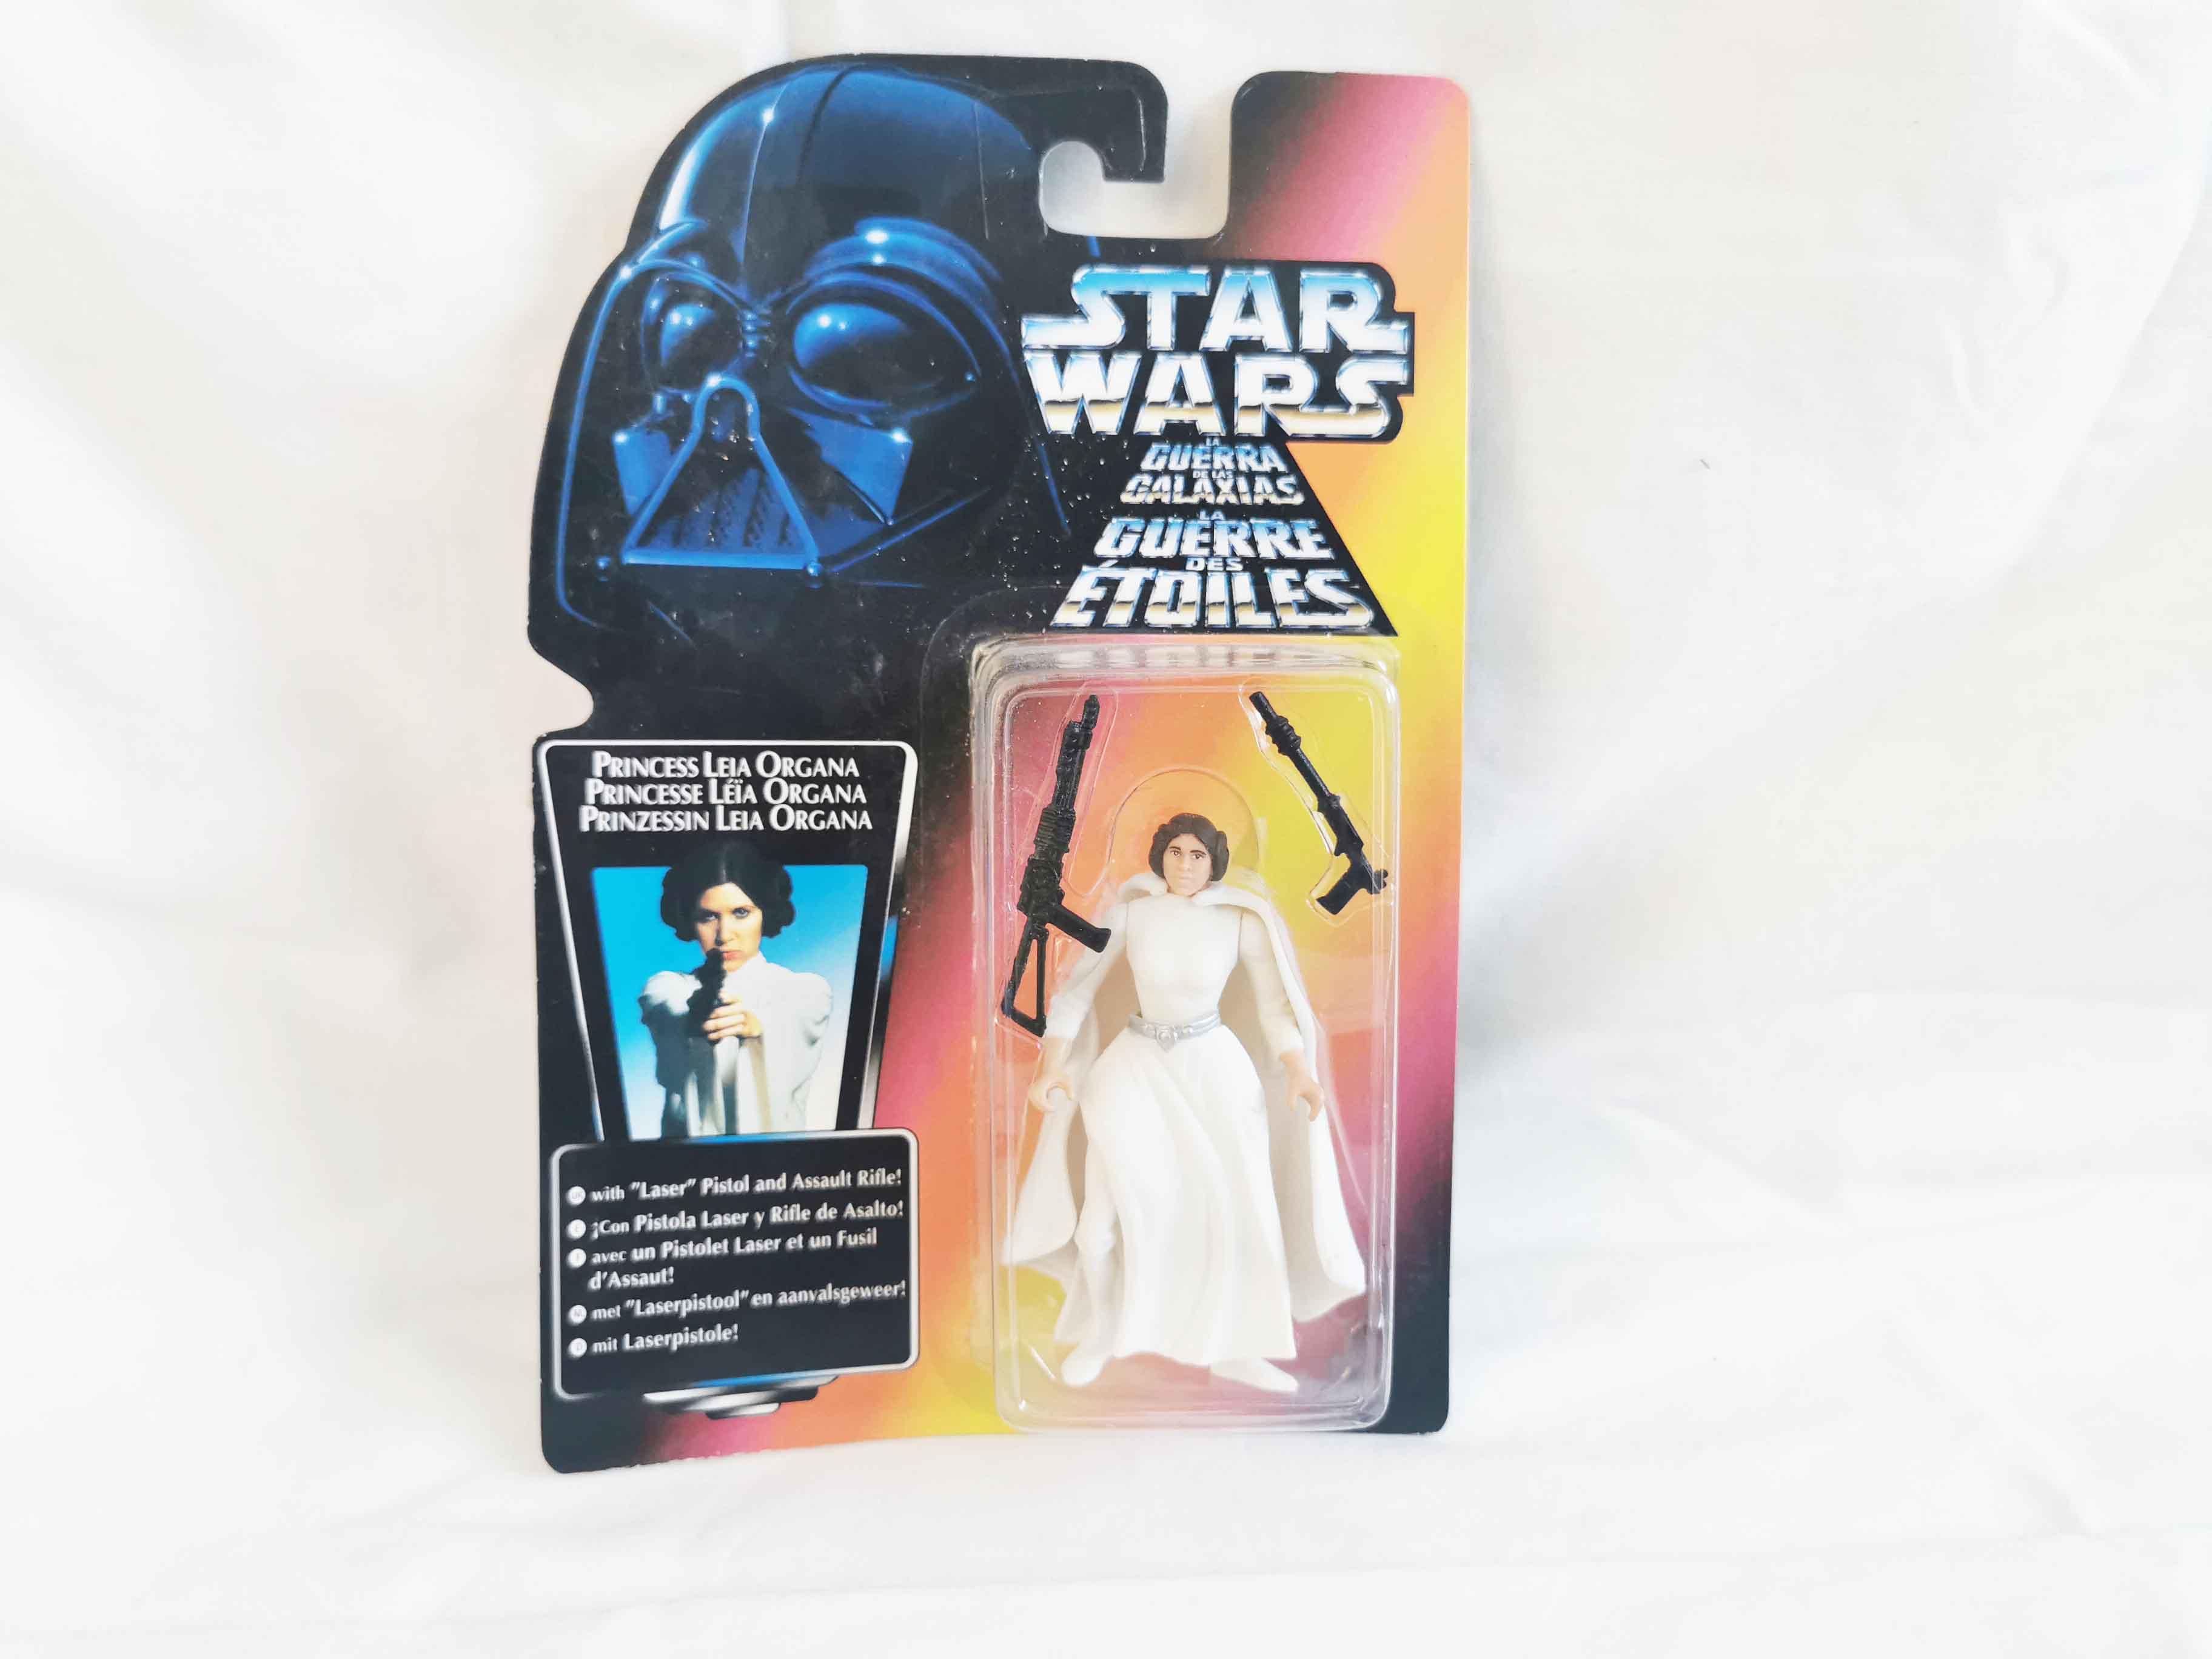 Star Wars Princess Leia Organa Action Figure 3.75” Star Wars Power of the Force